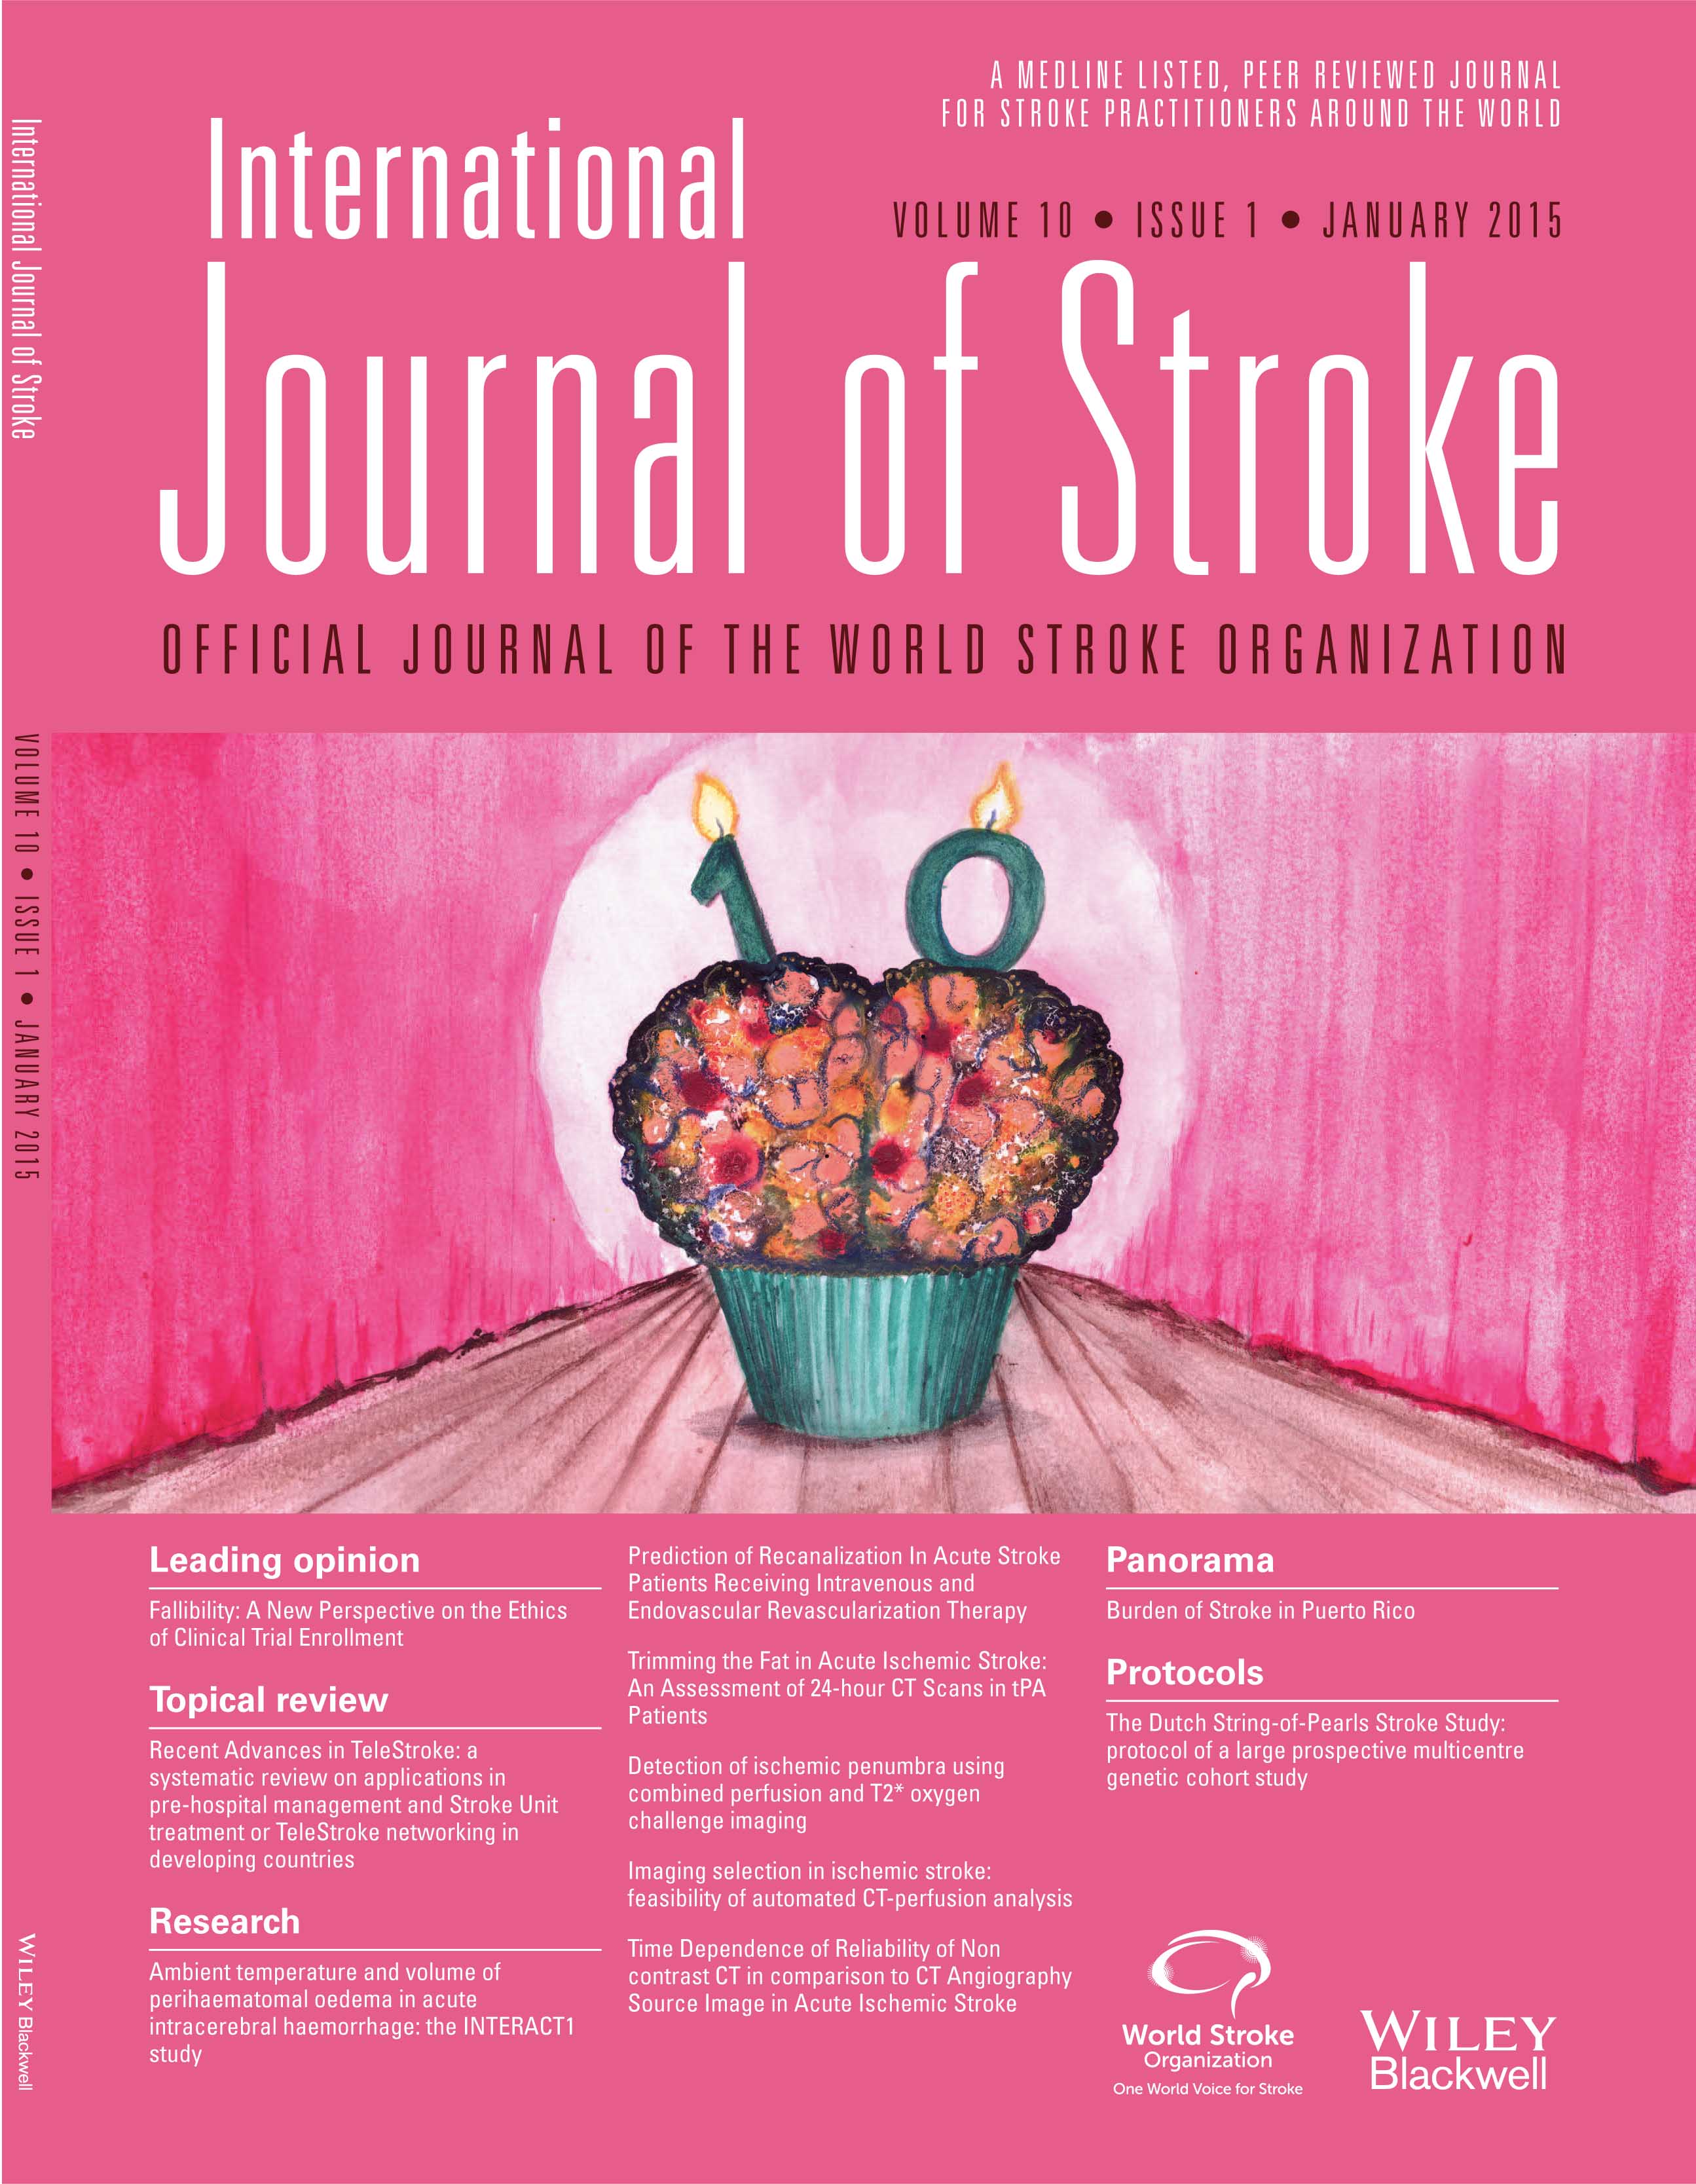 Burden of stroke in Italy: an economic model highlights savings arising from reduced disability following thrombolysis